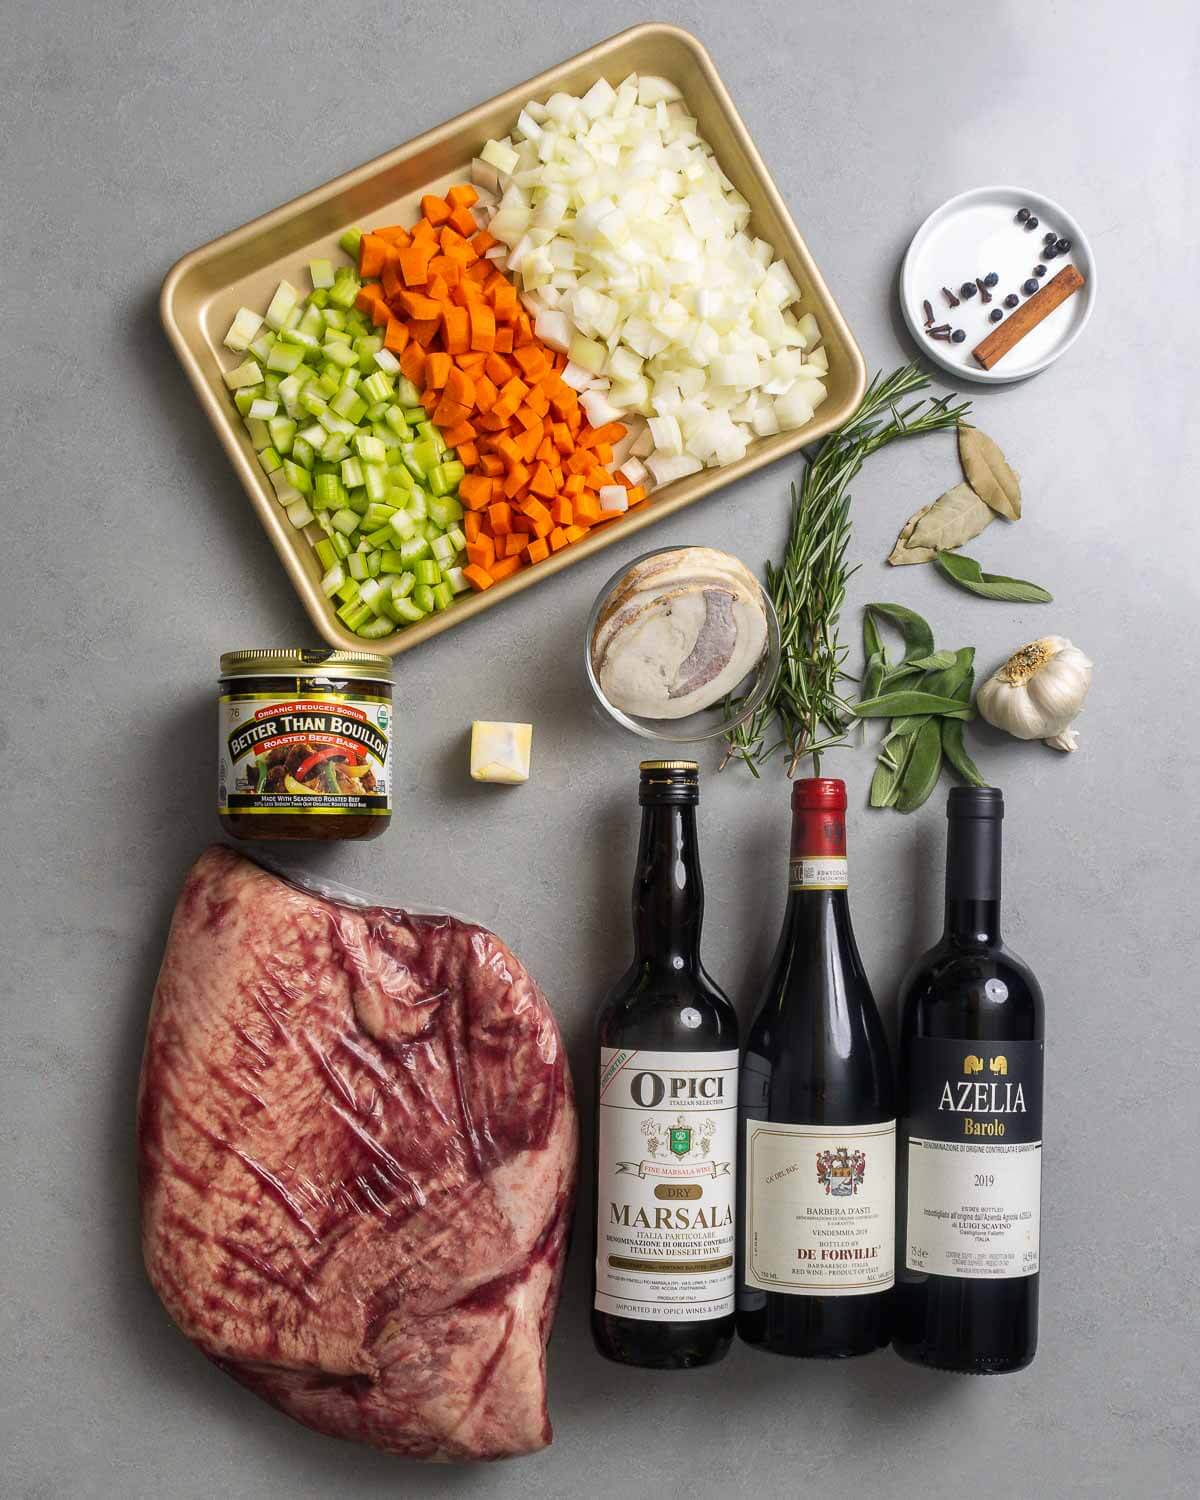 Ingredients shown: celery, carrots, onions, cinnamon, cloves, juniper berries, bay leaves, rosemary, sage, garlic, pancetta, butter, beef stock, brisket, and barbera, barolo, and marsala wines.